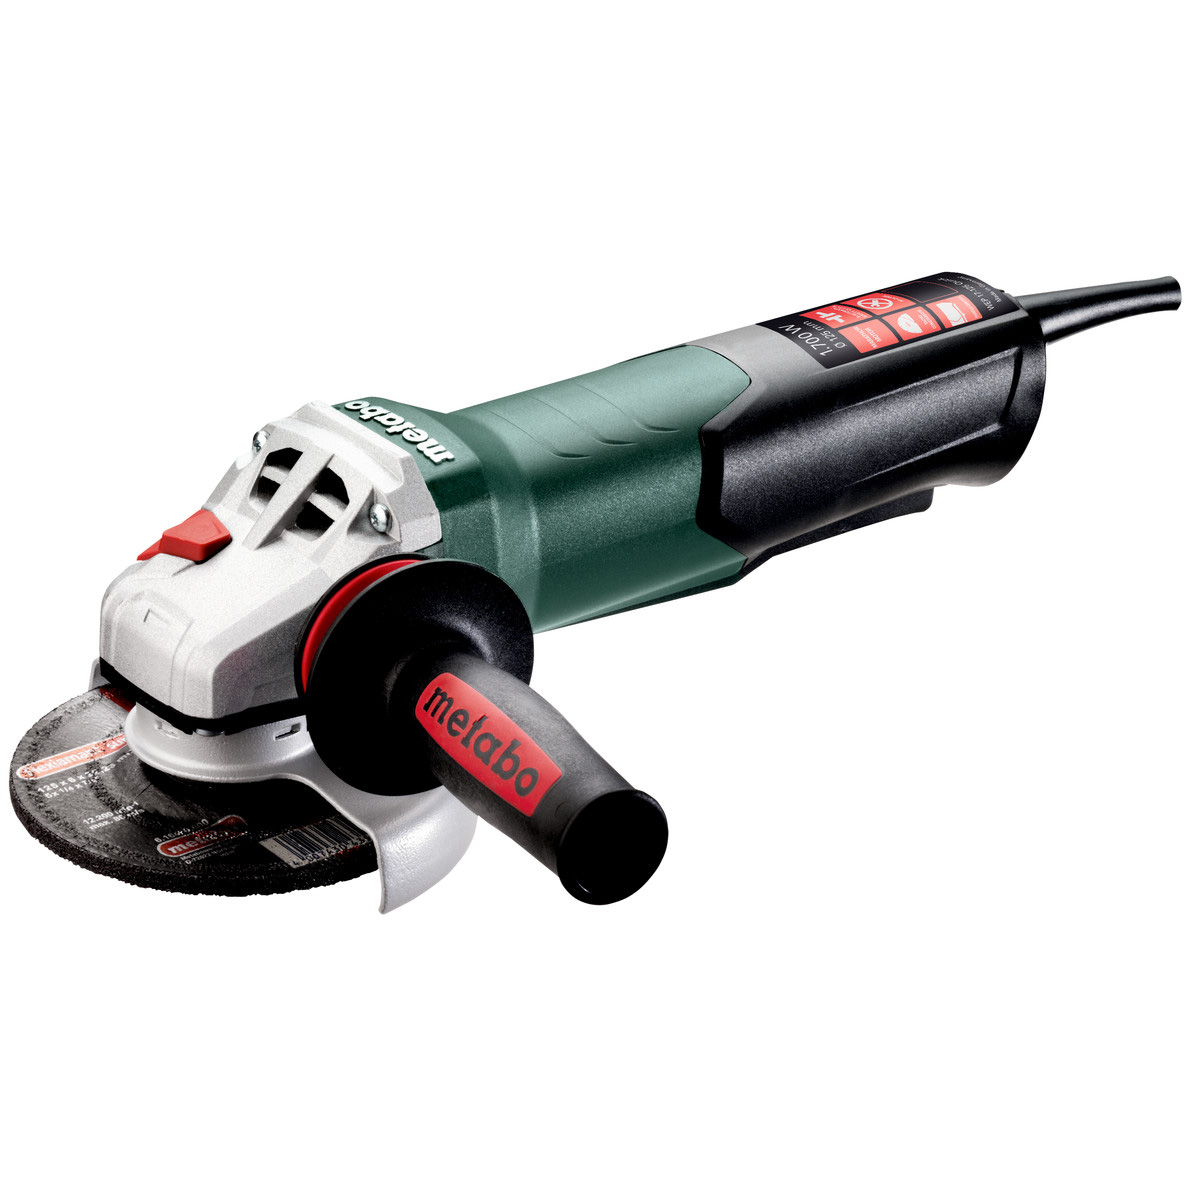 Metabo 1700W 125mm Angle Grinder WEP 17-125 QUICK 600547190